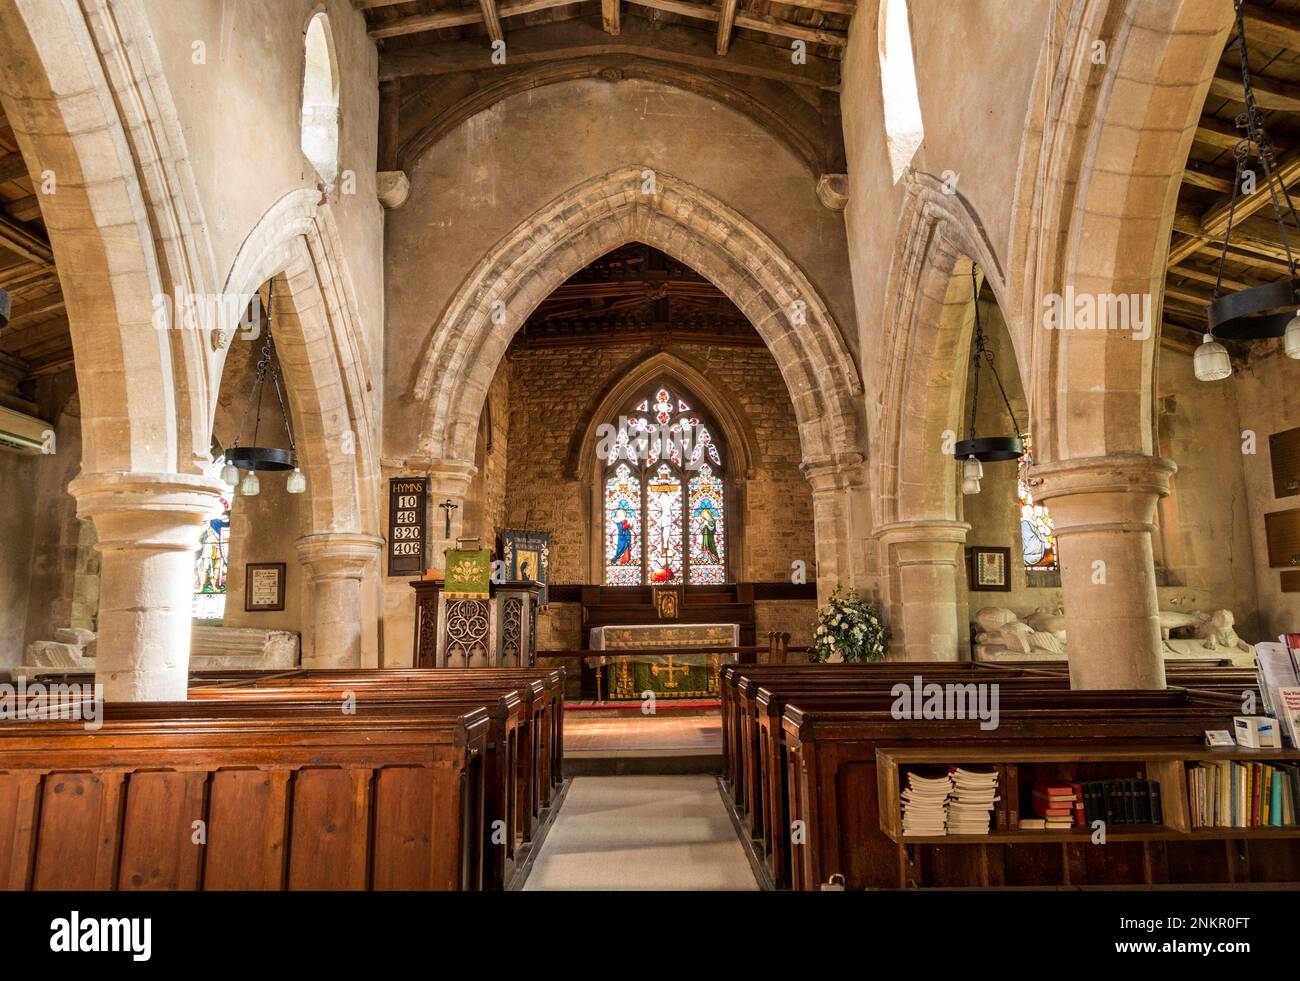 The central aisle / nave, pews and altar of the small parish church of St Mary the Virgin, Burrough on the Hill Leicestershire, England, UK Stock Photo